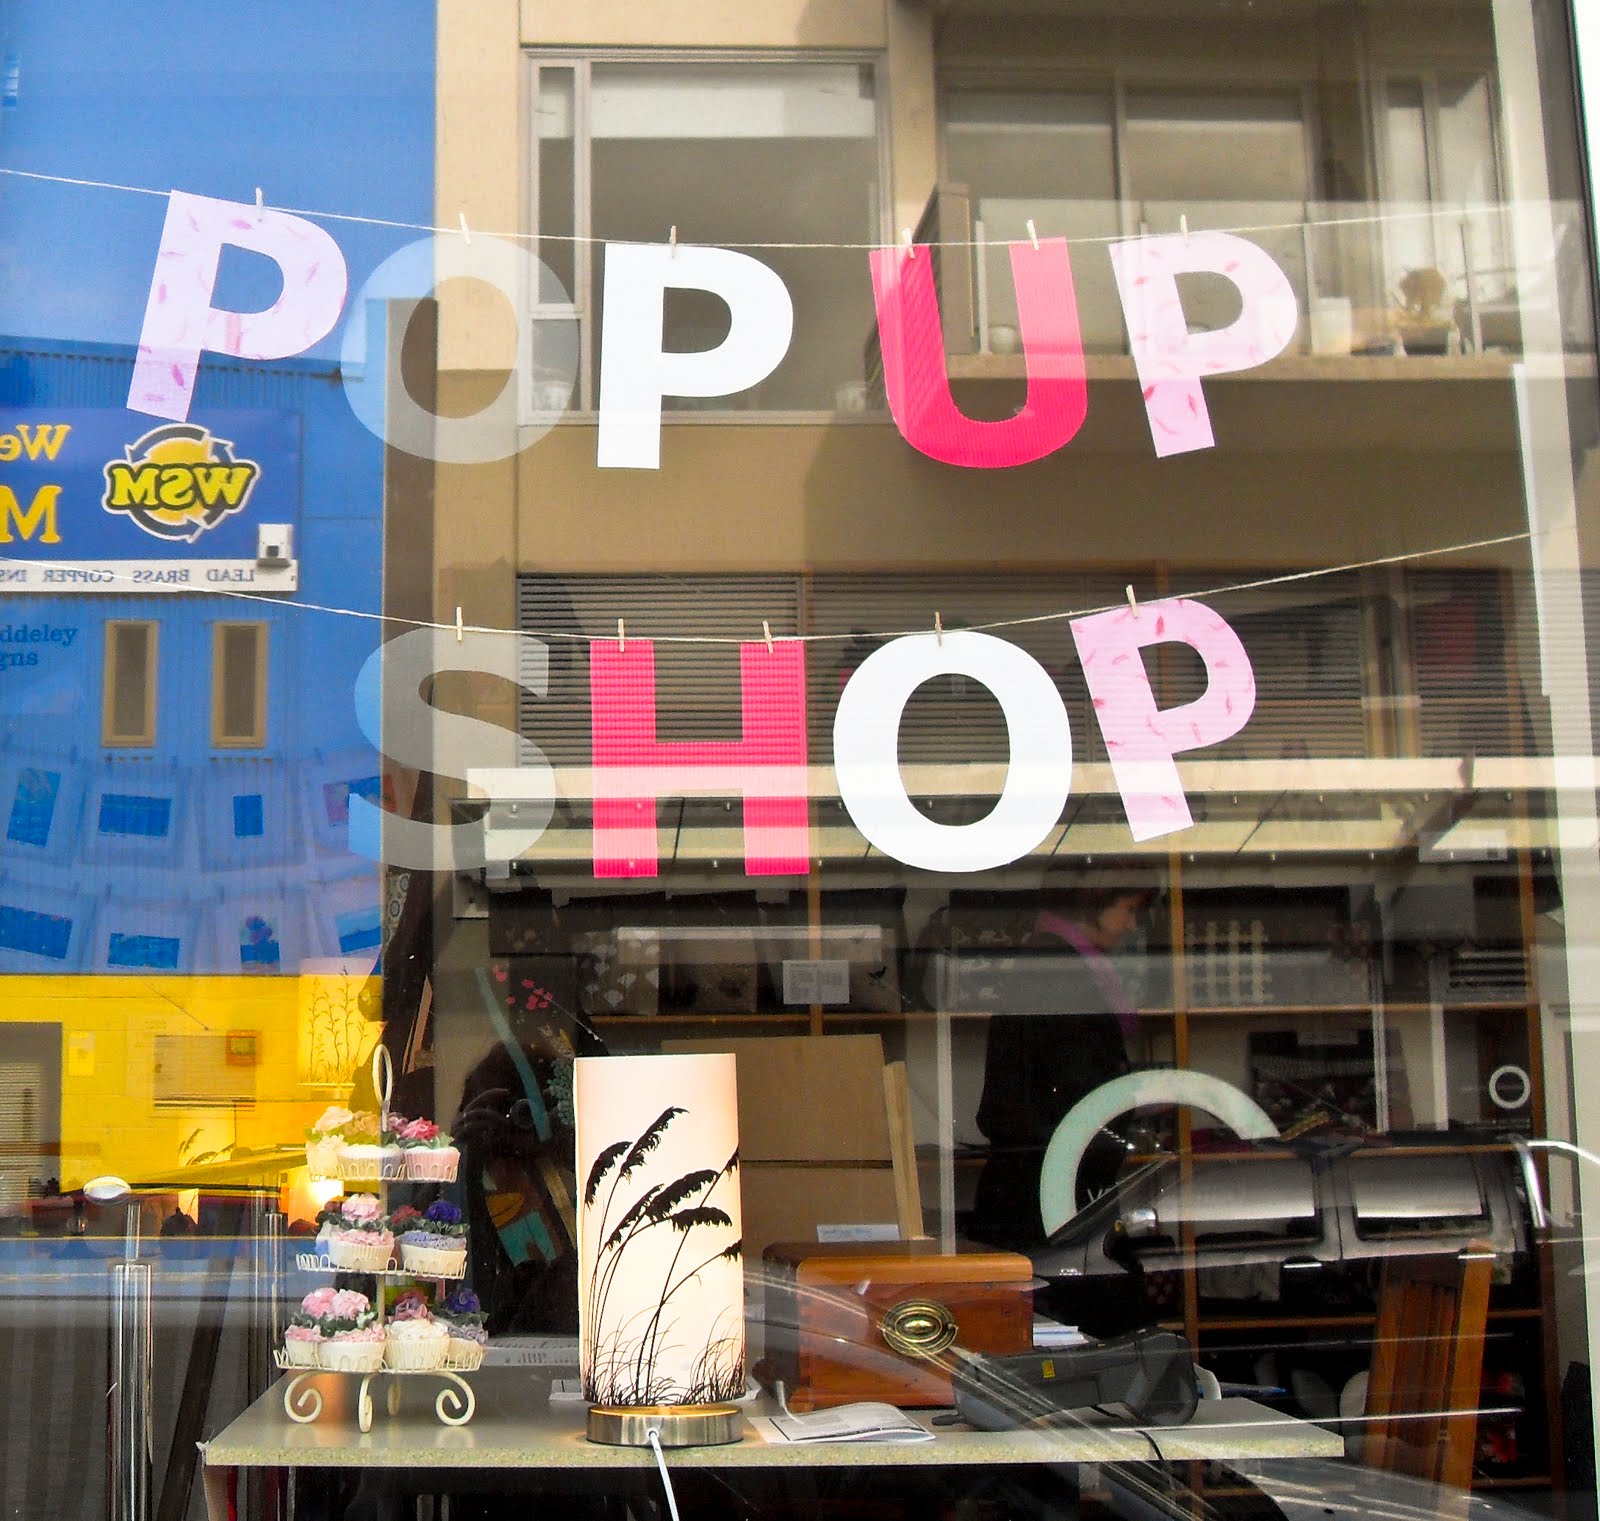 Starting a retail business? Here’s everything you need to know about pop up shops